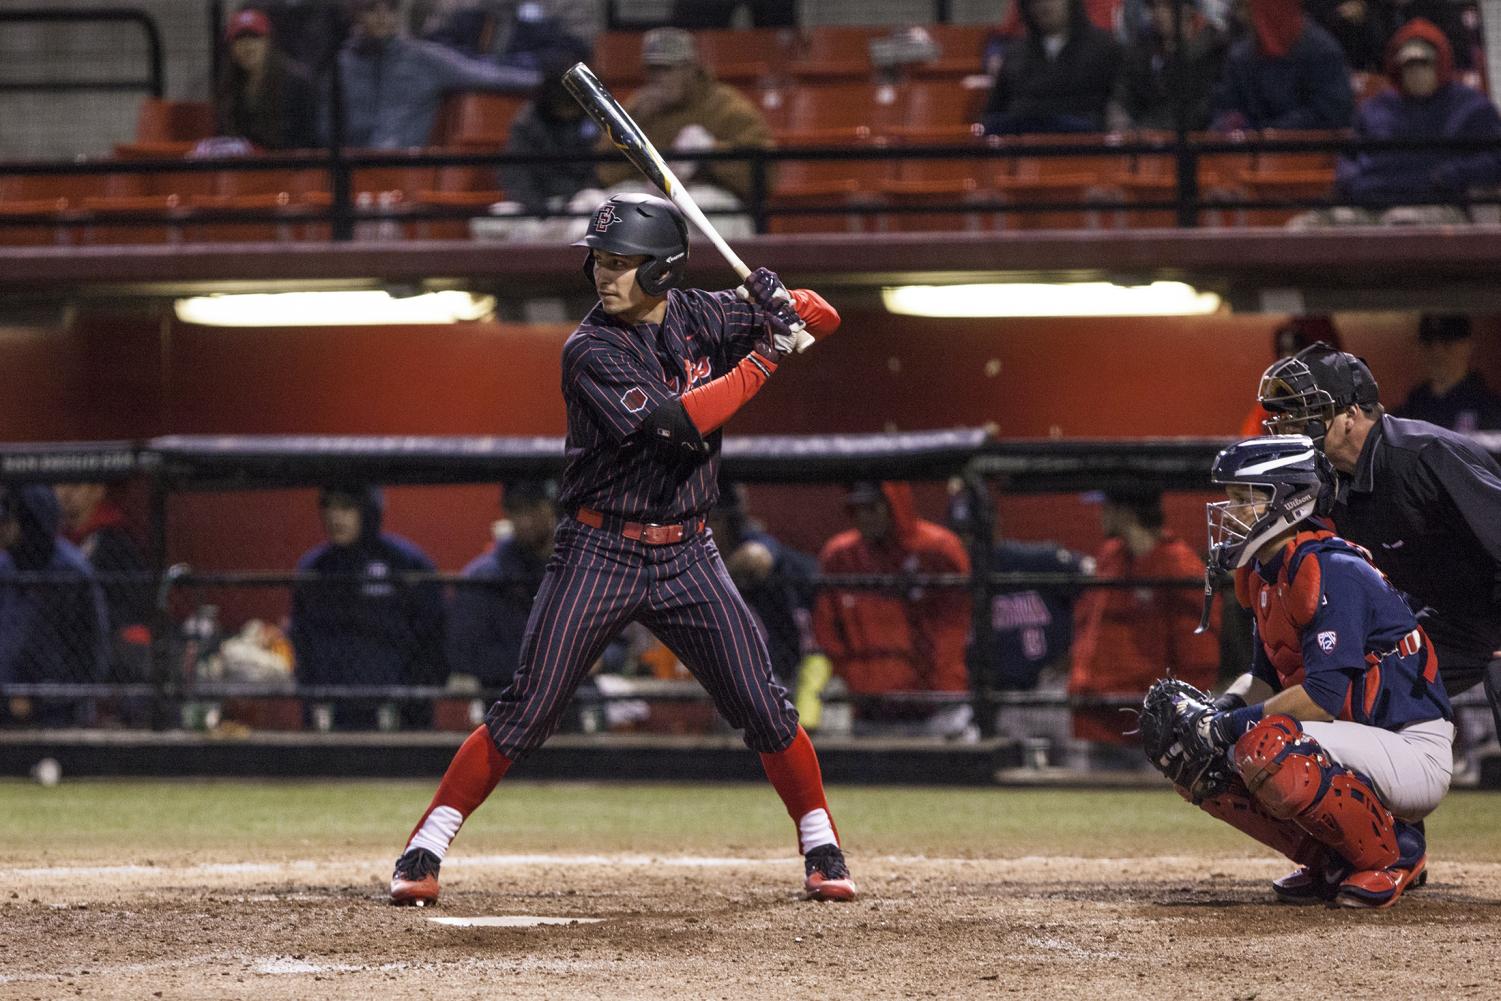 Aztecs defeat Air Force, 3-2, to open weekend series – The Daily Aztec